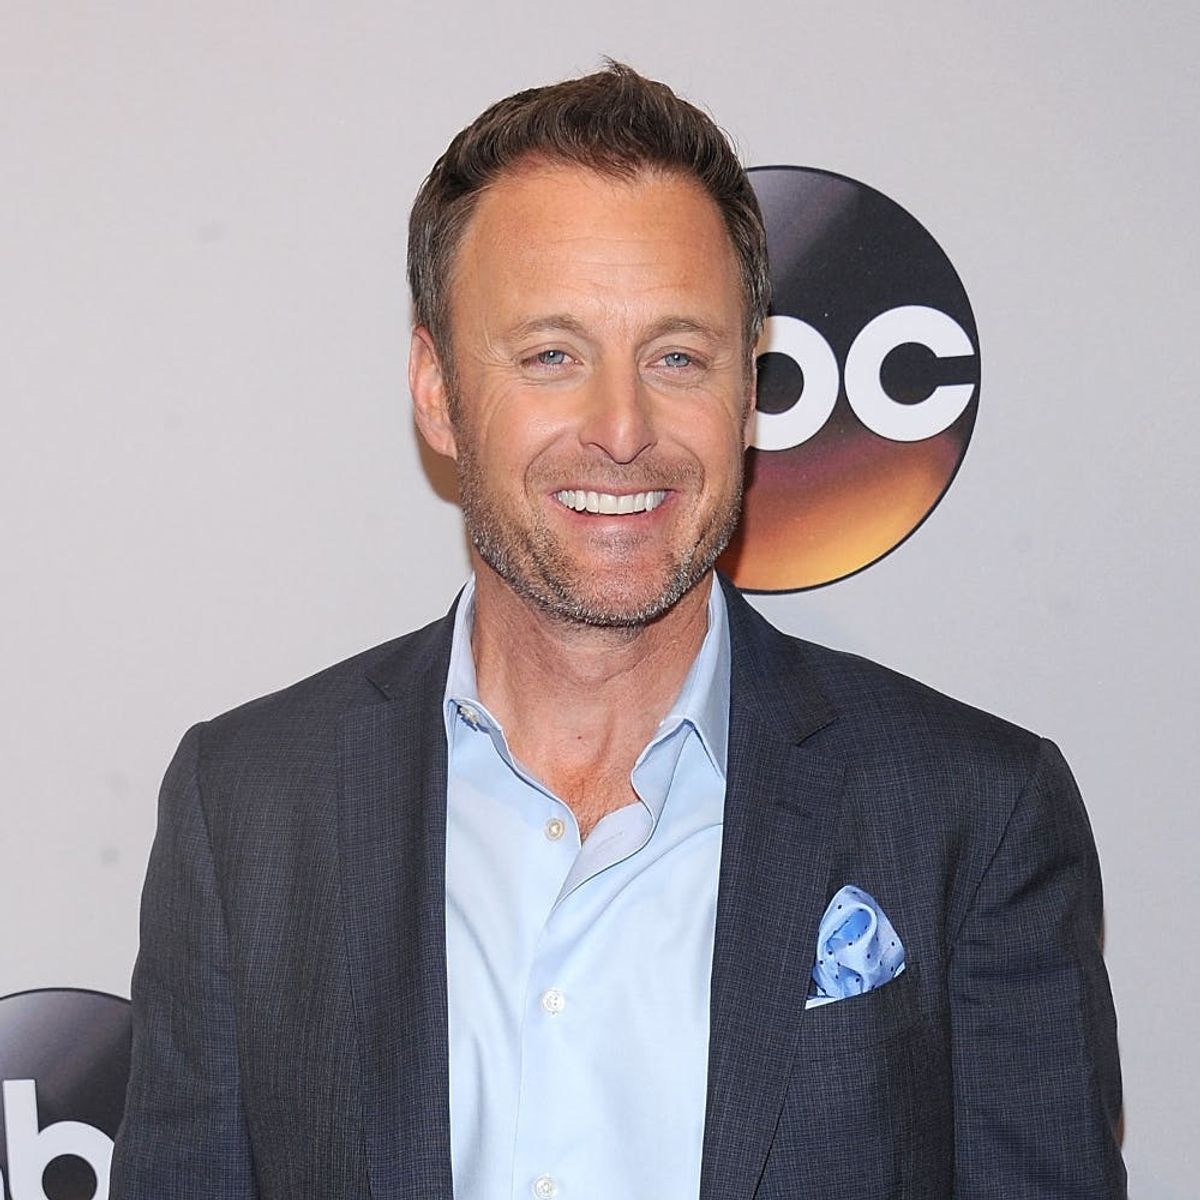 Chris Harrison Says the Bachelor in Paradise Scandal Brought Up Questions of “Loyalty, Integrity”